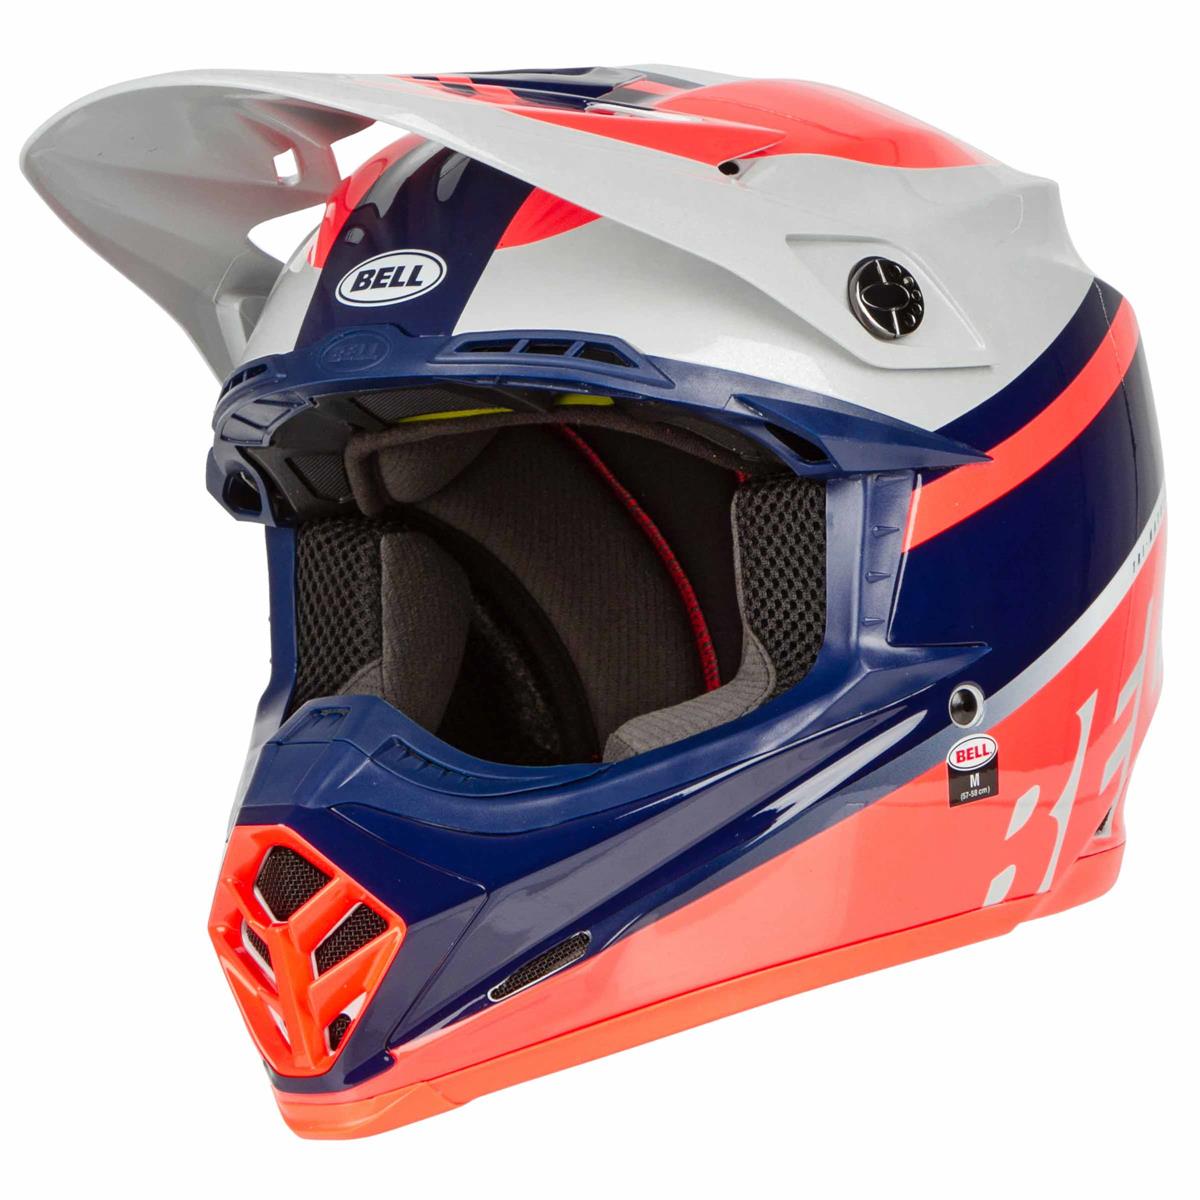 Bell Casco MX Moto-9 Mips Prophecy - Gloss Infrared/Navy/Gray